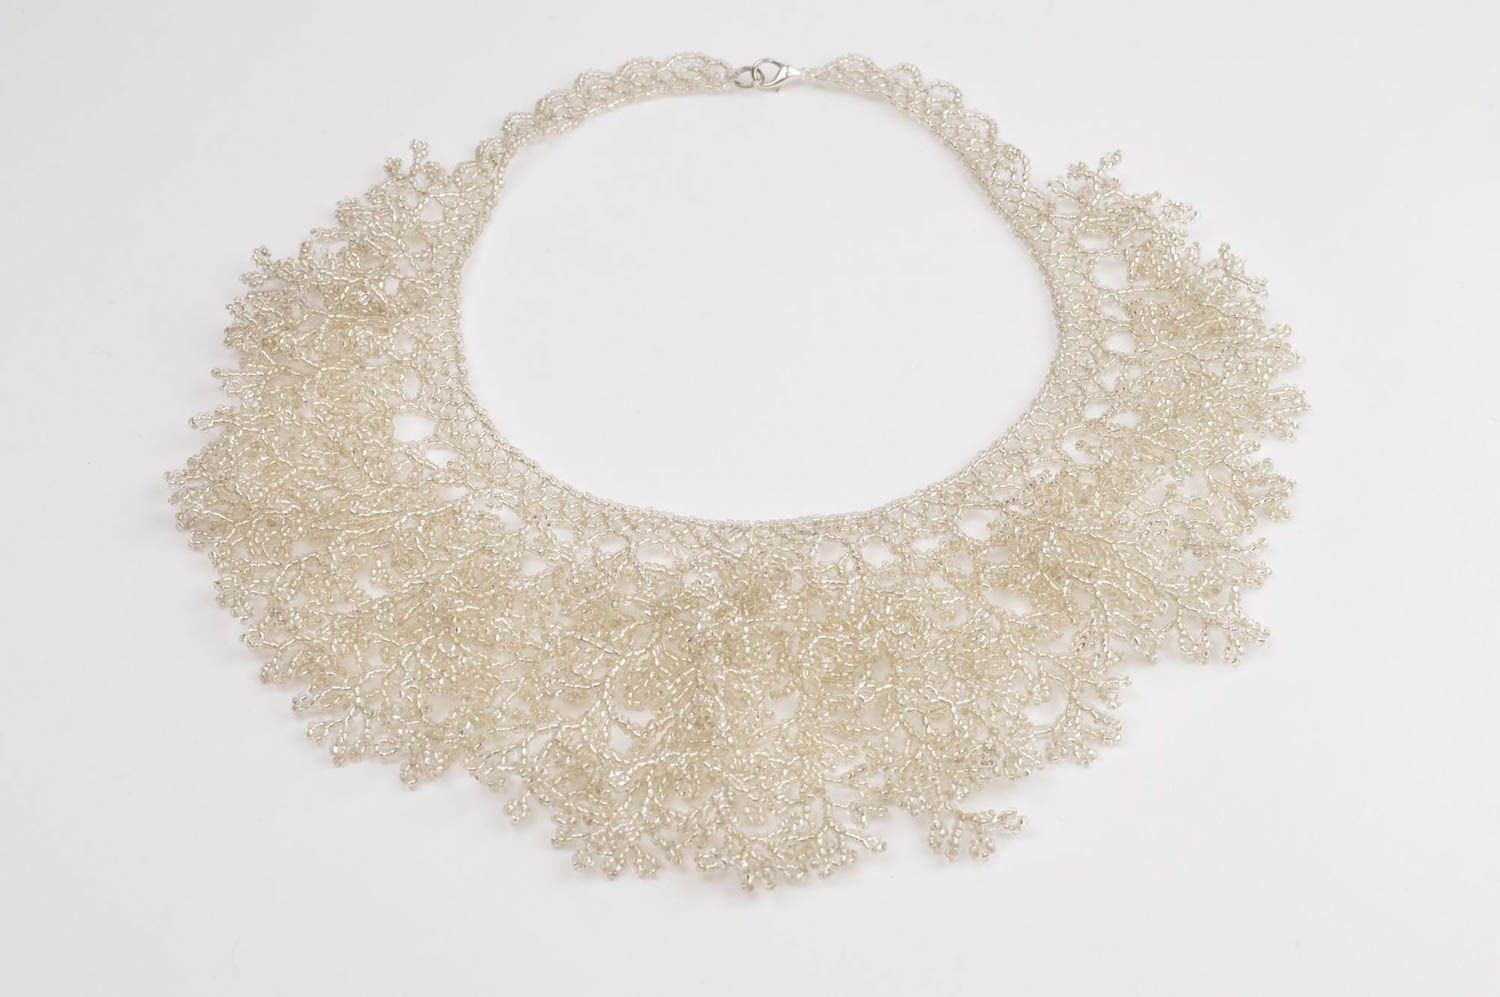 Delicate necklace stylish bijouterie seed bead necklace fashion lacy necklace photo 3